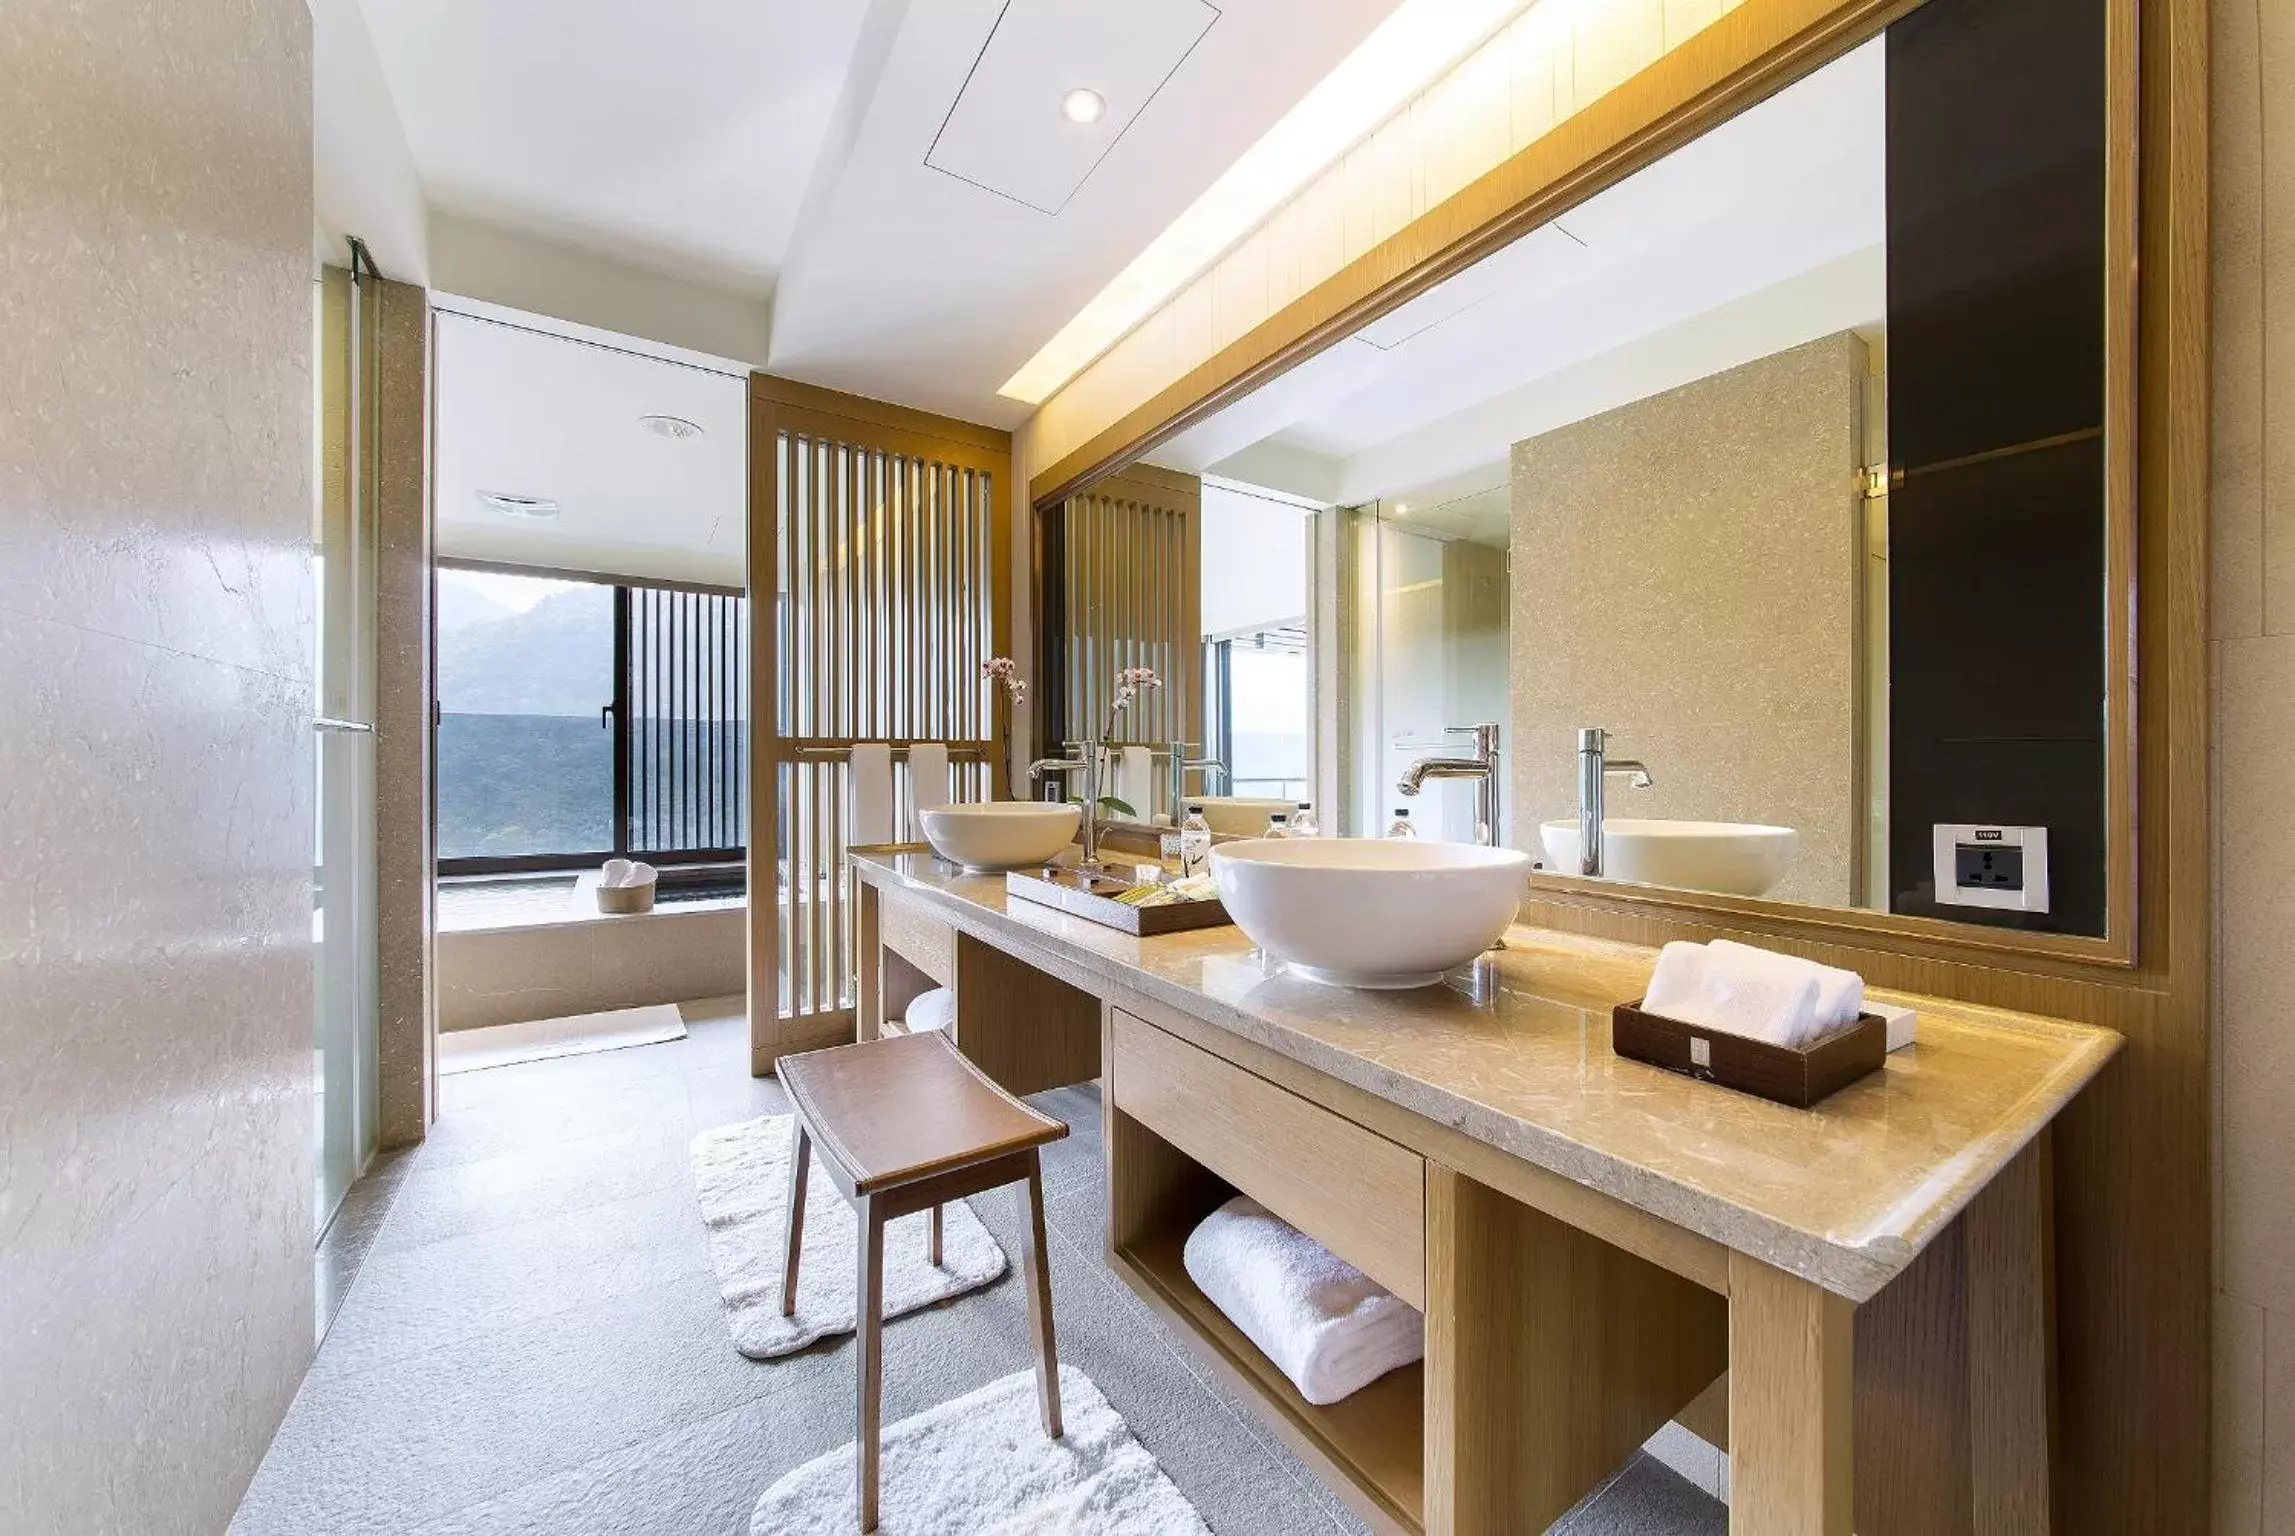 Bathroom in Grand View Resort Beitou